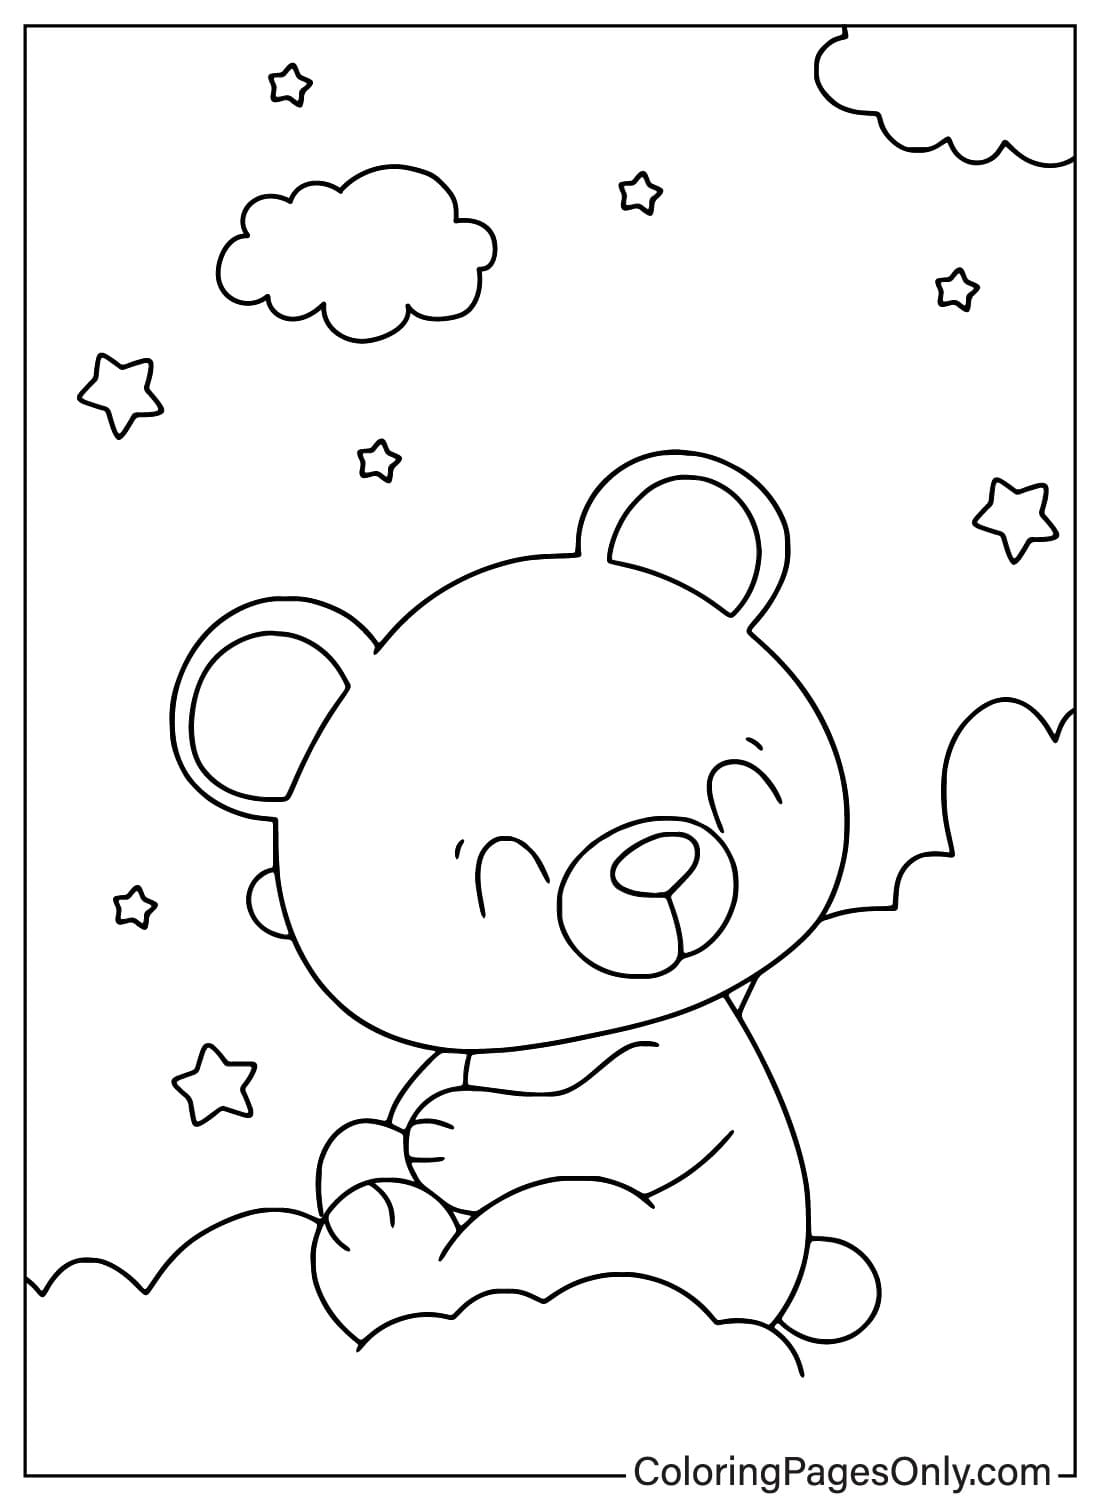 89 Free Printable Teddy Bear Coloring Pages